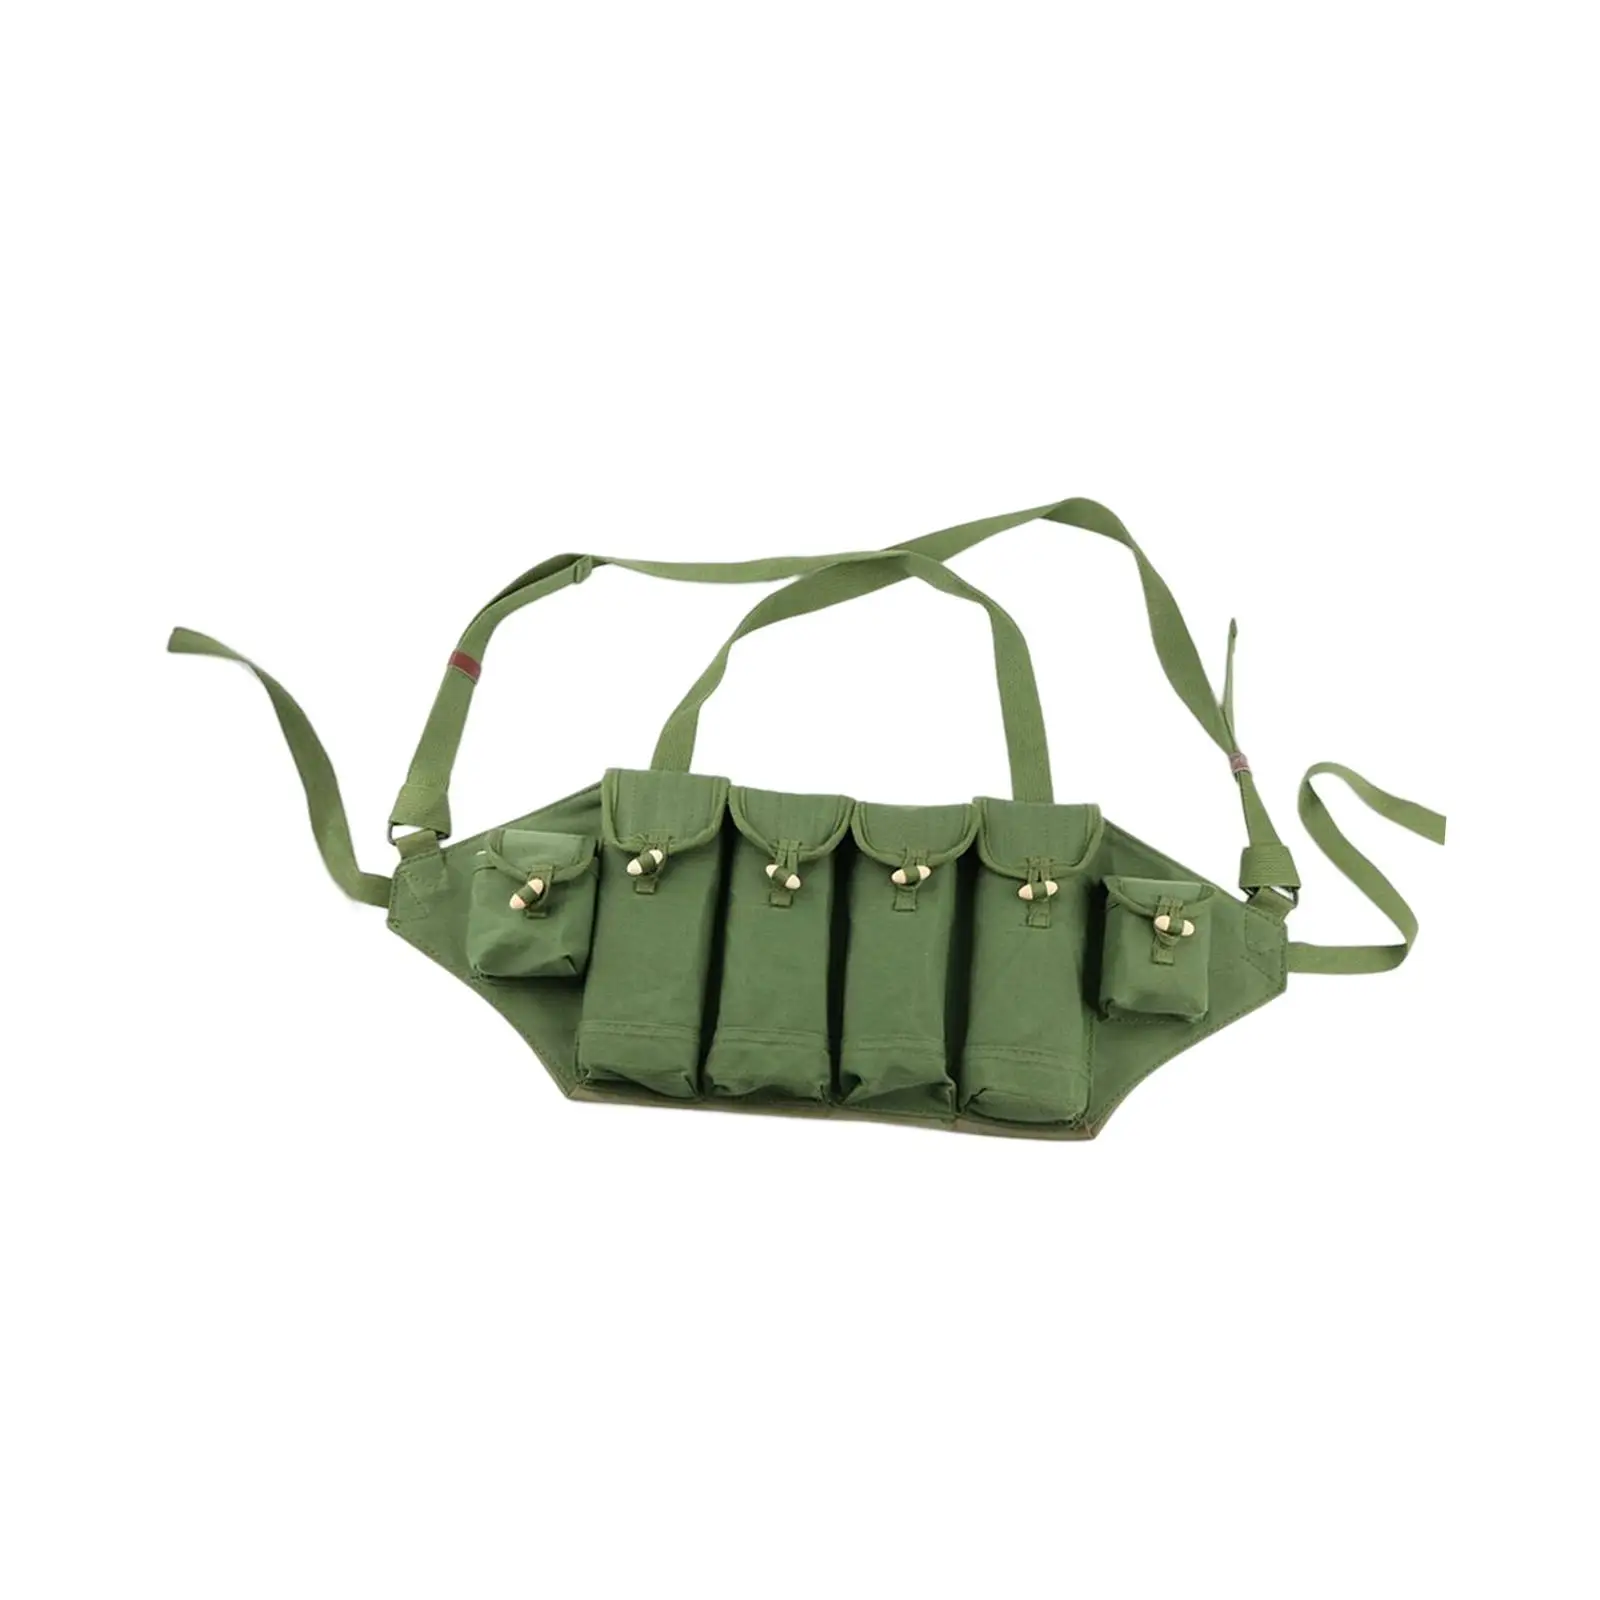 Chest Rig Molle Adjustable Quick Release Bandolier Pouch Storage Bag Portable Vest for Outdoor combating Hunting